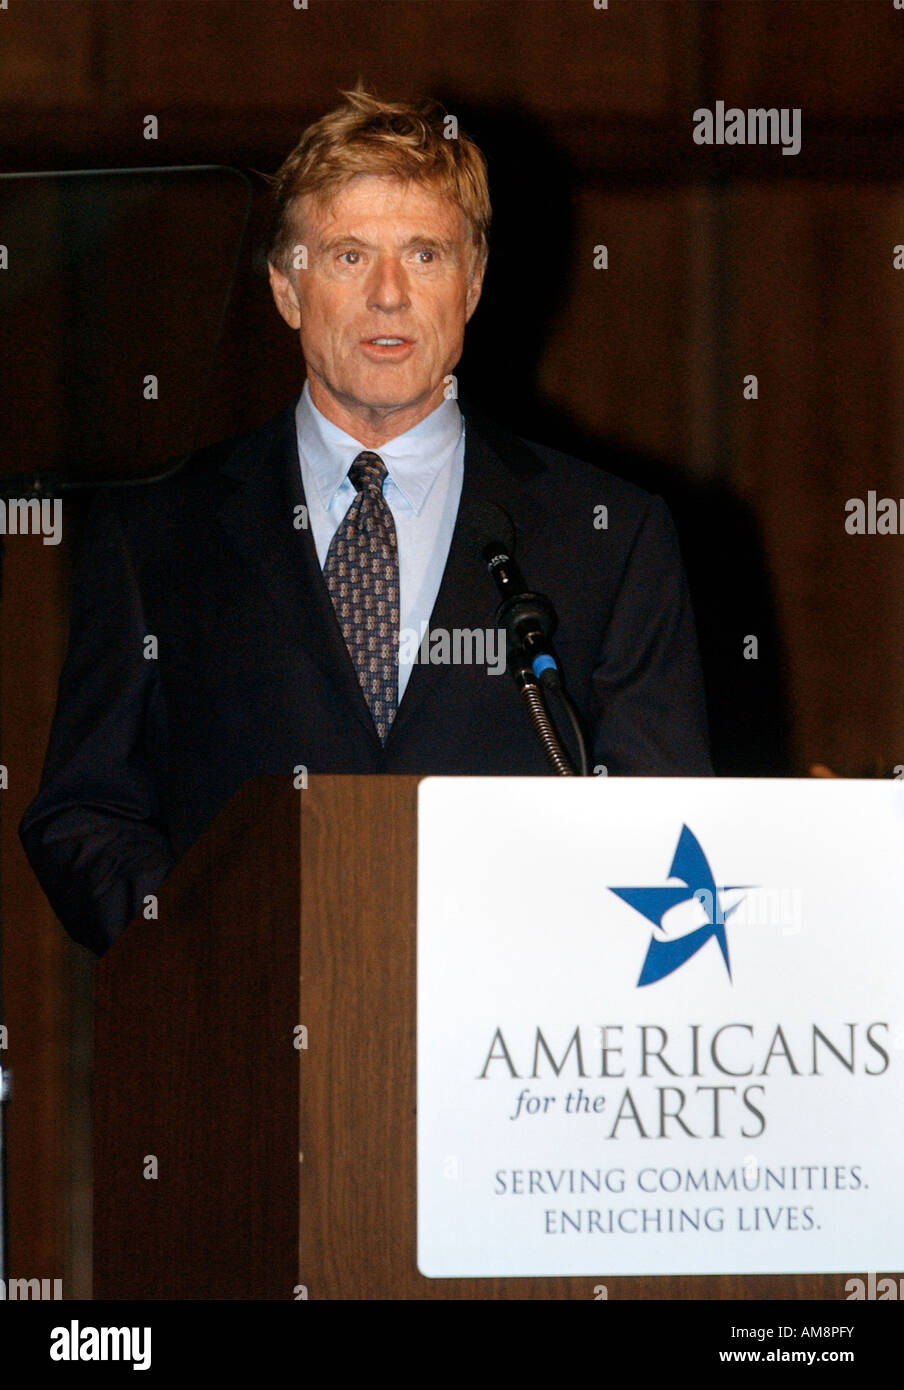 Robert Redford walks on stage at the American for the Arts 16th annual Nancy Hanks Lecture on Arts and Public Policy in Washingt Stock Photo